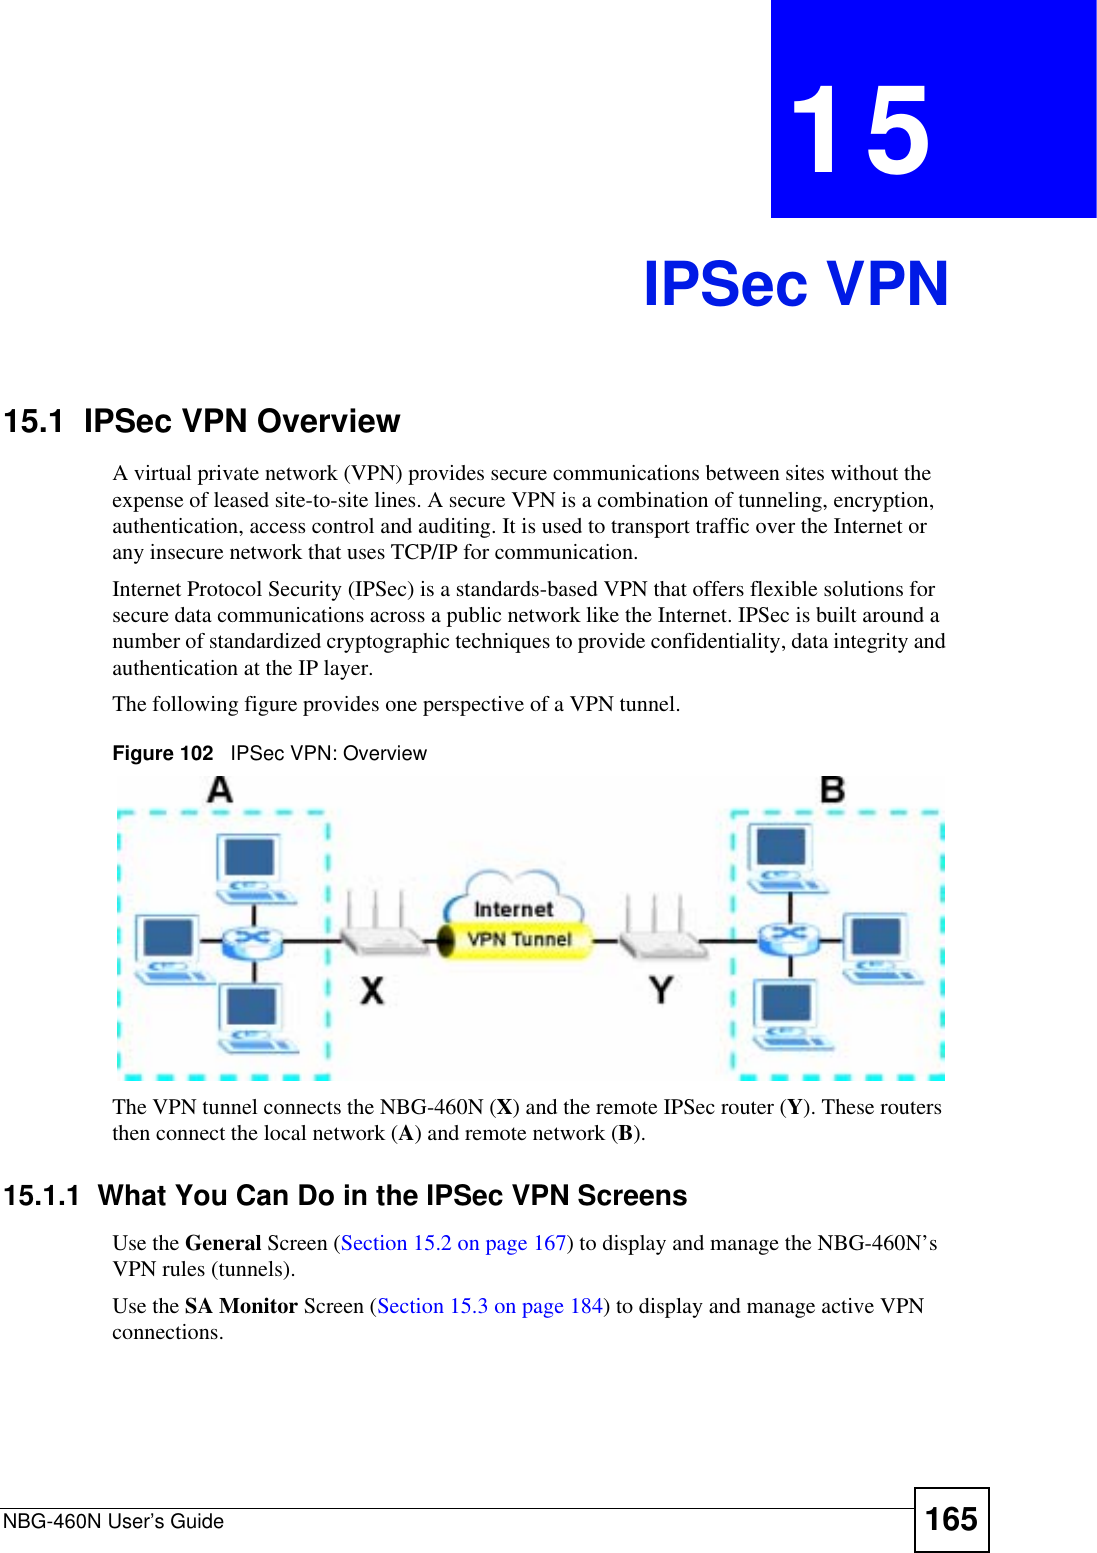 NBG-460N User’s Guide 165CHAPTER 15IPSec VPN15.1  IPSec VPN OverviewA virtual private network (VPN) provides secure communications between sites without the expense of leased site-to-site lines. A secure VPN is a combination of tunneling, encryption, authentication, access control and auditing. It is used to transport traffic over the Internet or any insecure network that uses TCP/IP for communication.Internet Protocol Security (IPSec) is a standards-based VPN that offers flexible solutions for secure data communications across a public network like the Internet. IPSec is built around a number of standardized cryptographic techniques to provide confidentiality, data integrity and authentication at the IP layer.The following figure provides one perspective of a VPN tunnel.Figure 102   IPSec VPN: OverviewThe VPN tunnel connects the NBG-460N (X) and the remote IPSec router (Y). These routers then connect the local network (A) and remote network (B).15.1.1  What You Can Do in the IPSec VPN ScreensUse the General Screen (Section 15.2 on page 167) to display and manage the NBG-460N’s VPN rules (tunnels).Use the SA Monitor Screen (Section 15.3 on page 184) to display and manage active VPN connections.